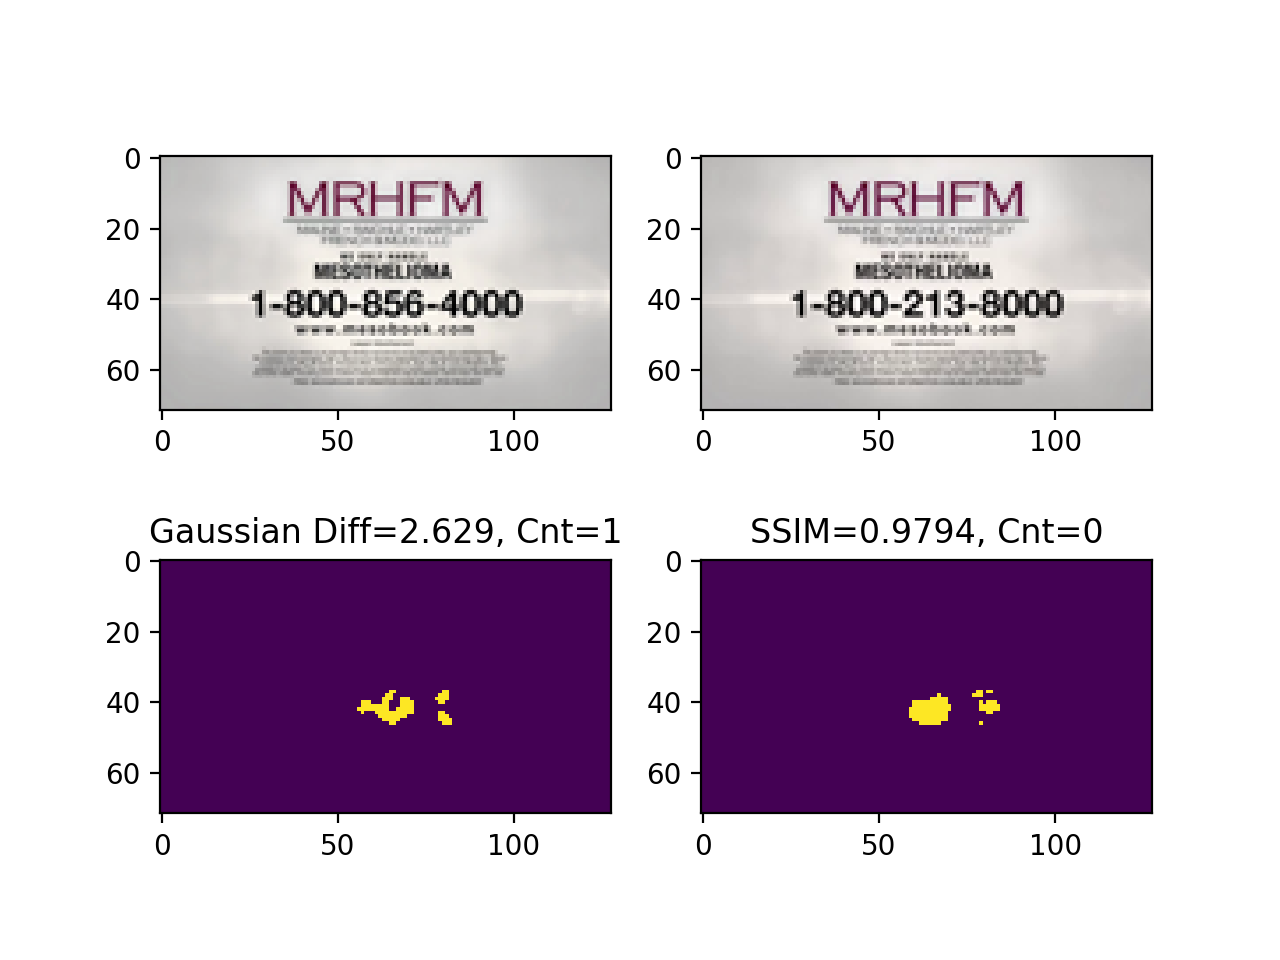 Gaussian vs SSIM both detecting phone number differences.